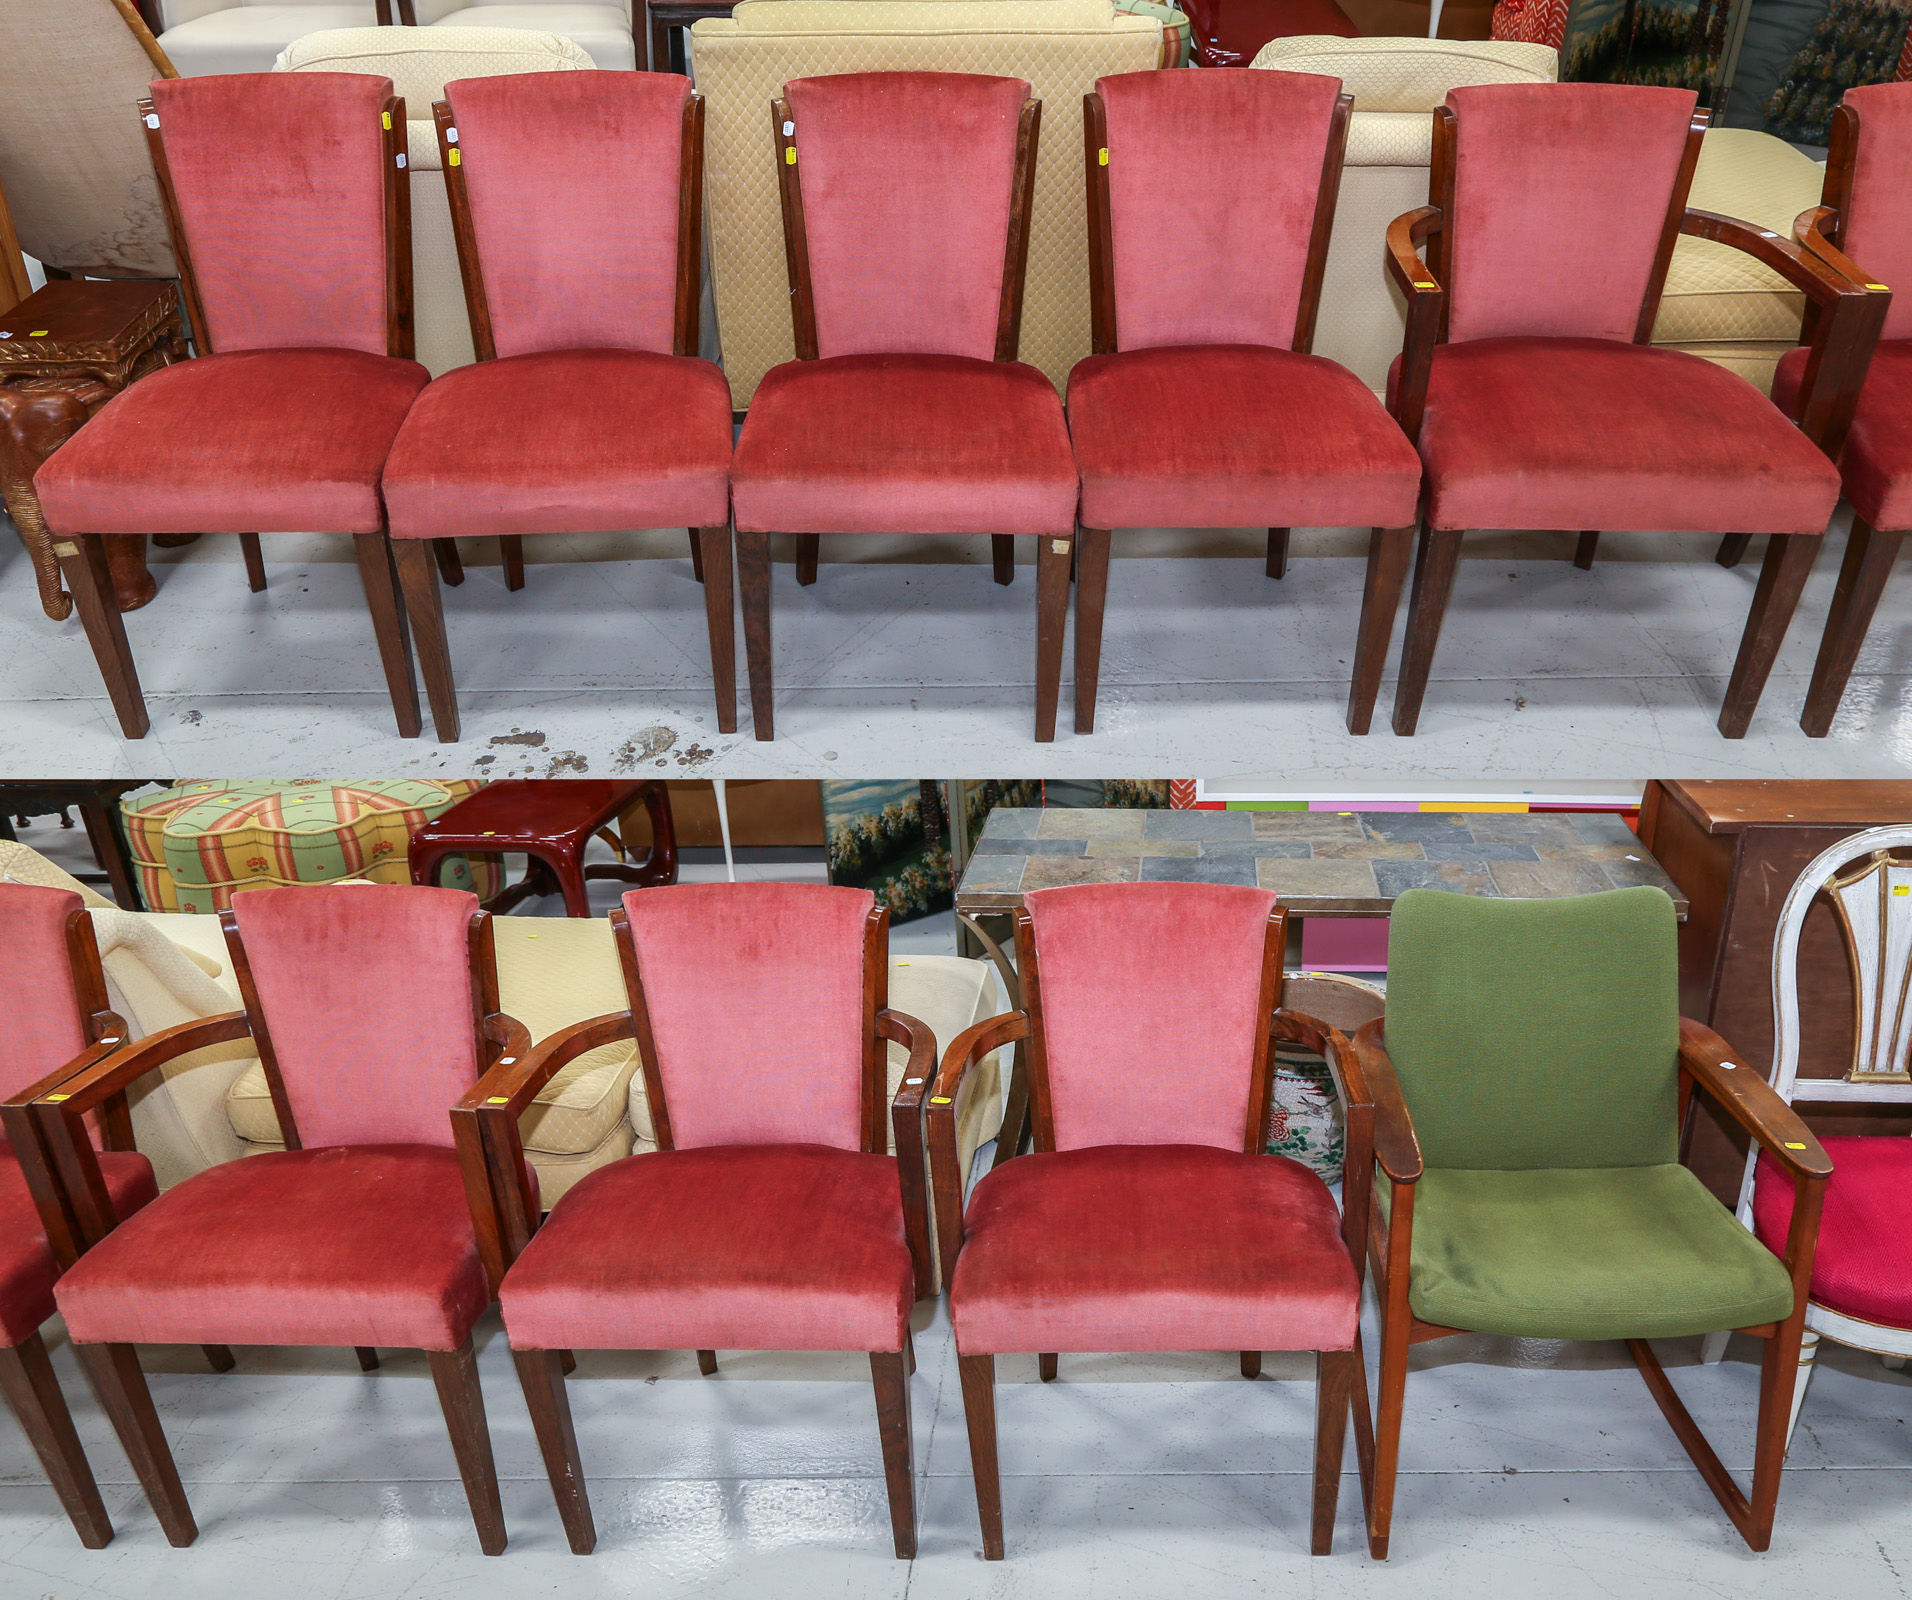 SET OF EIGHT ART DECO STYLE CHAIRS 3c75a1